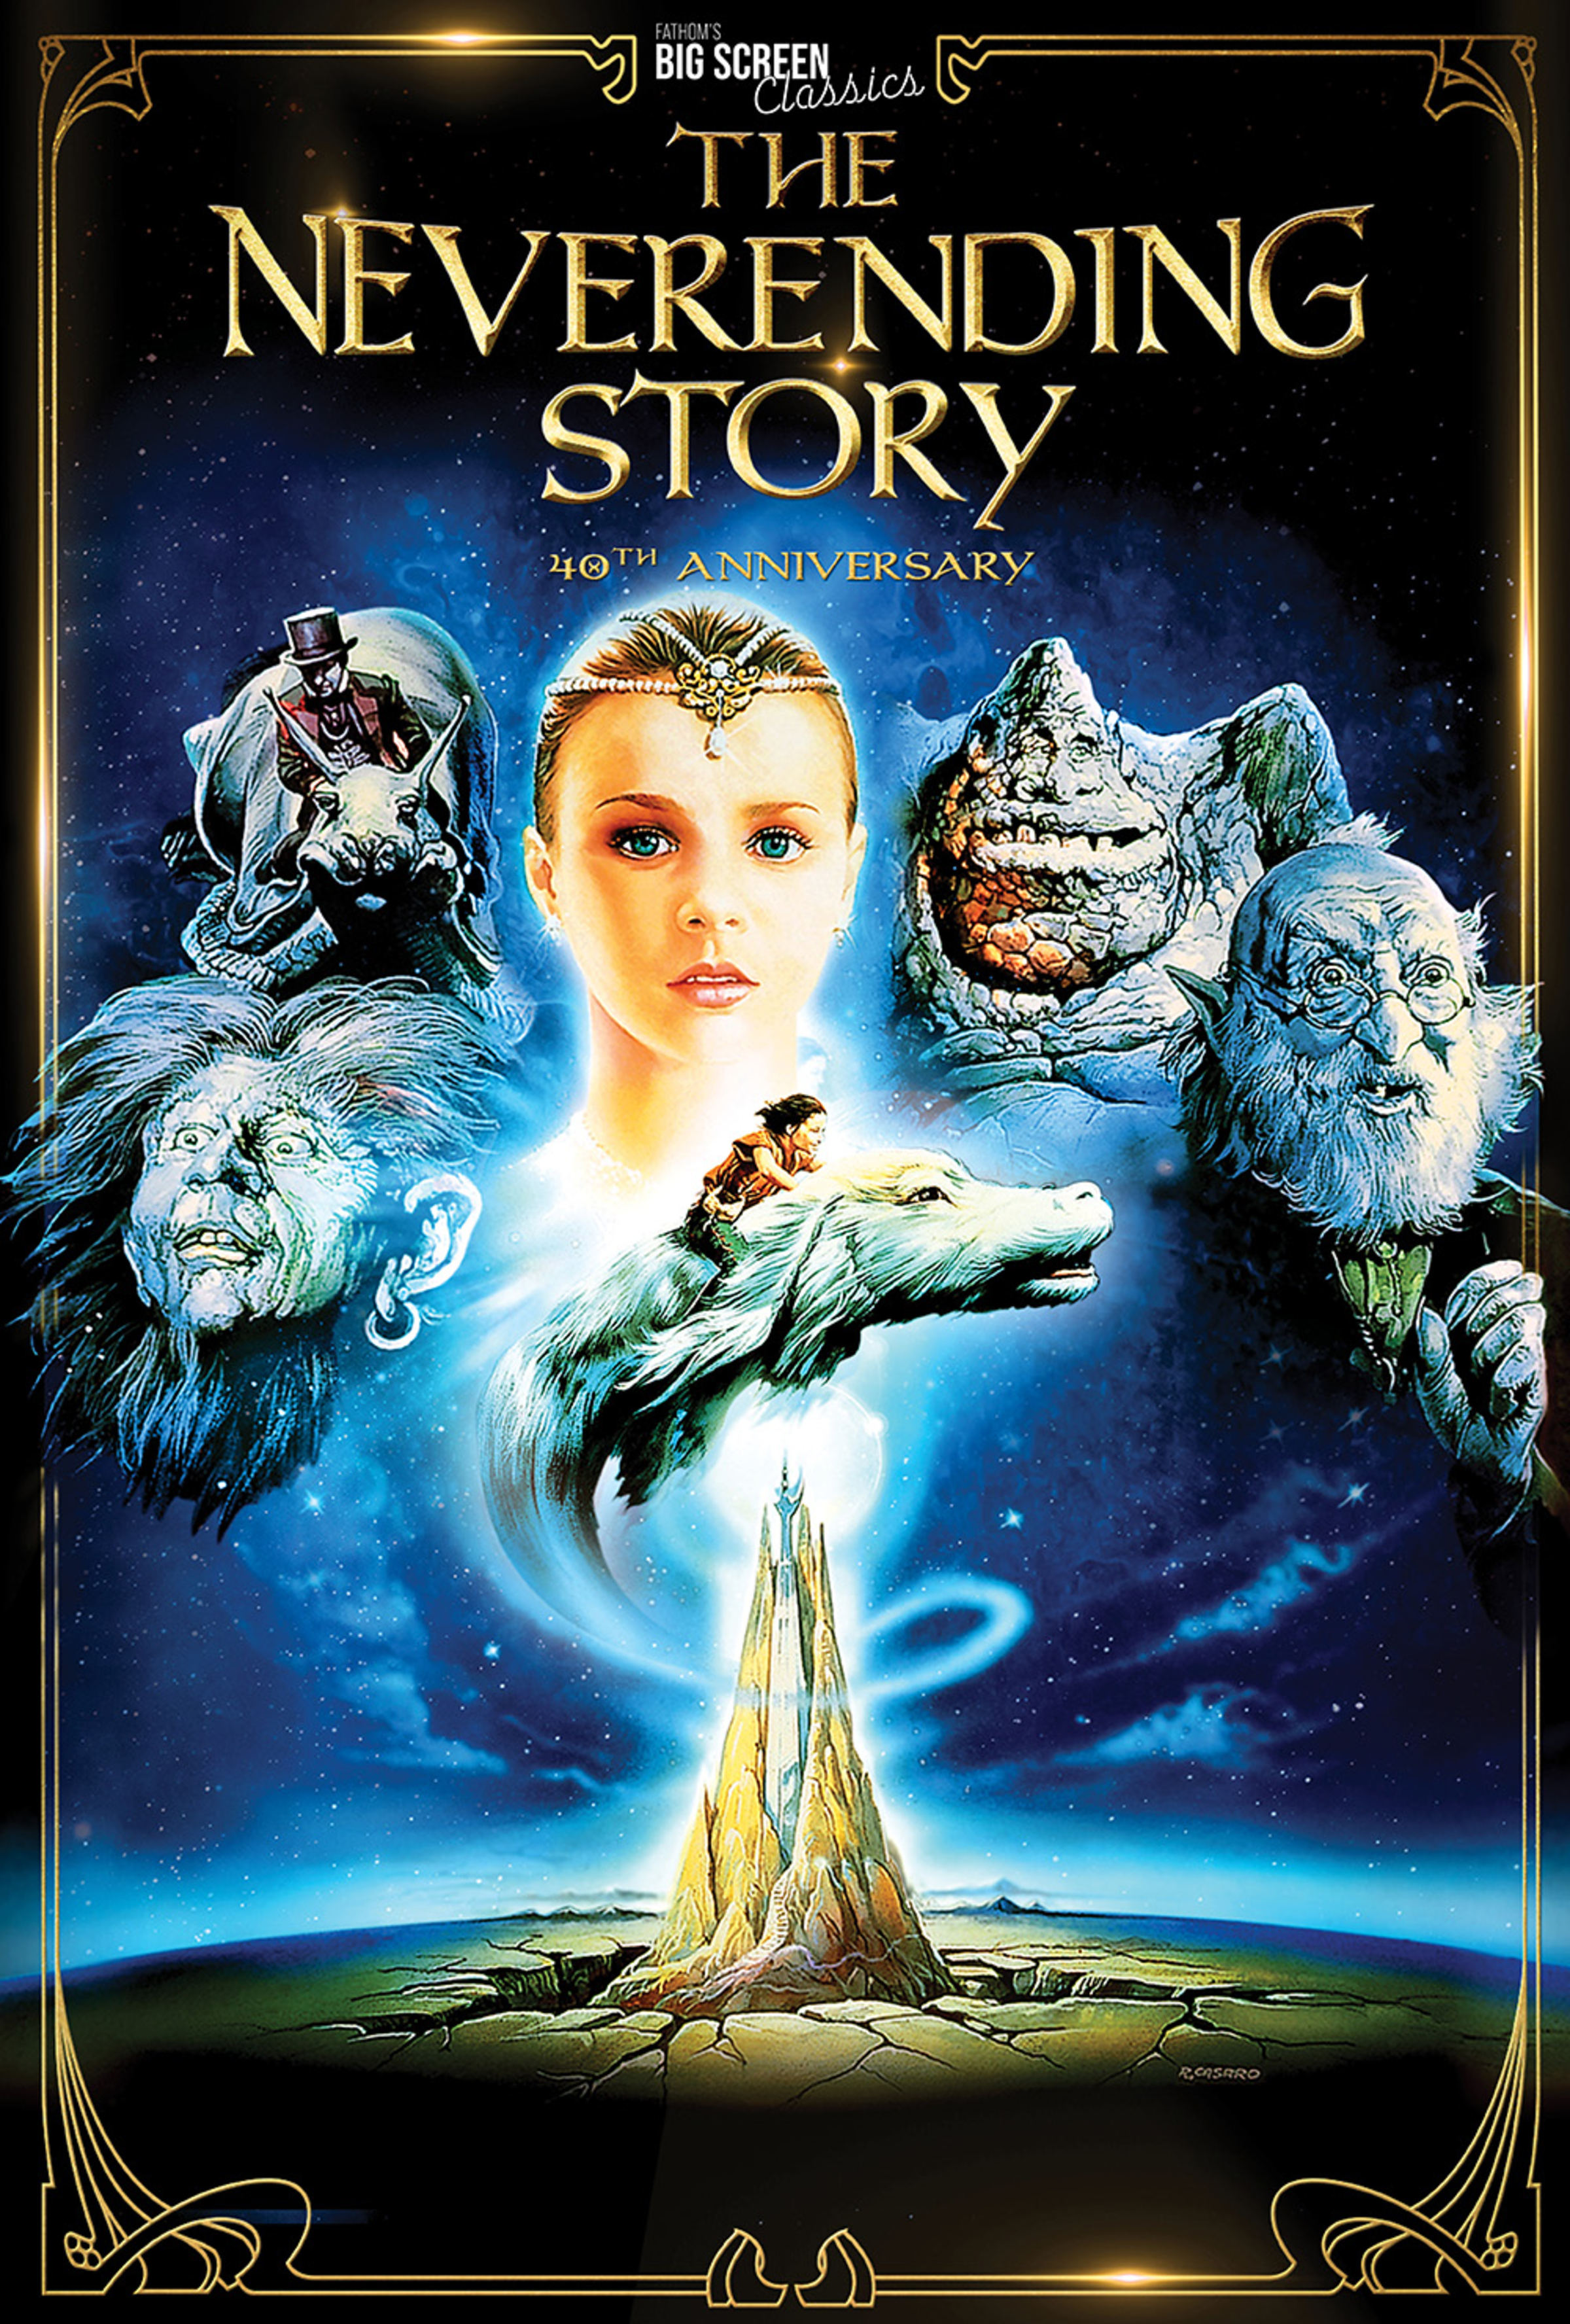 The NeverEnding Story 40th Anniversary Fathom Events